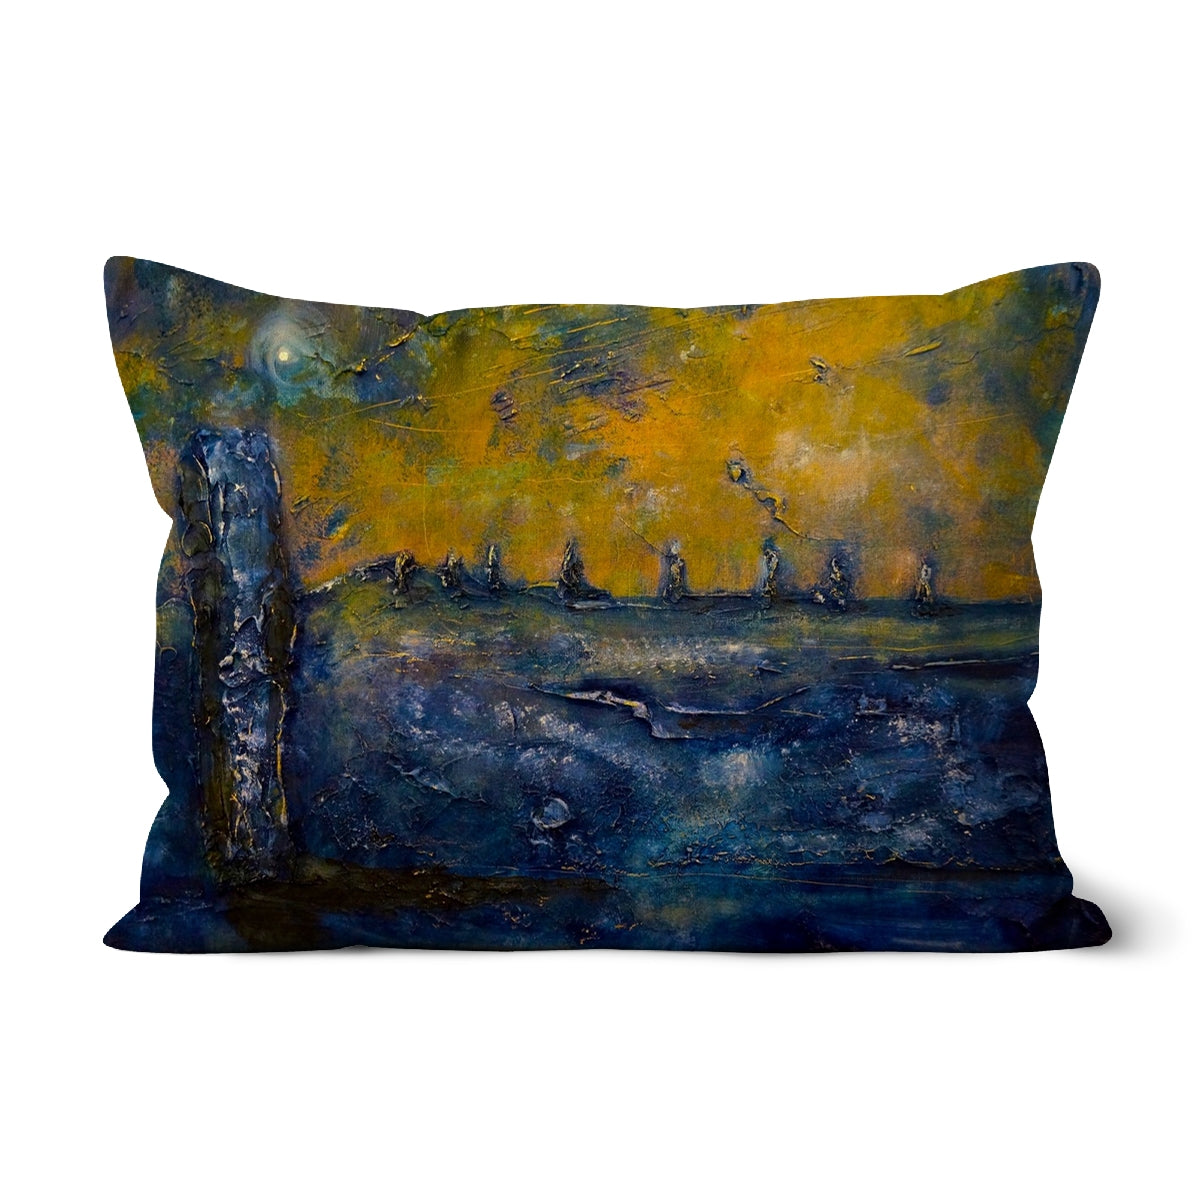 Brodgar Moonlight Orkney Art Gifts Cushion-Cushions-Orkney Art Gallery-Faux Suede-19"x13"-Paintings, Prints, Homeware, Art Gifts From Scotland By Scottish Artist Kevin Hunter